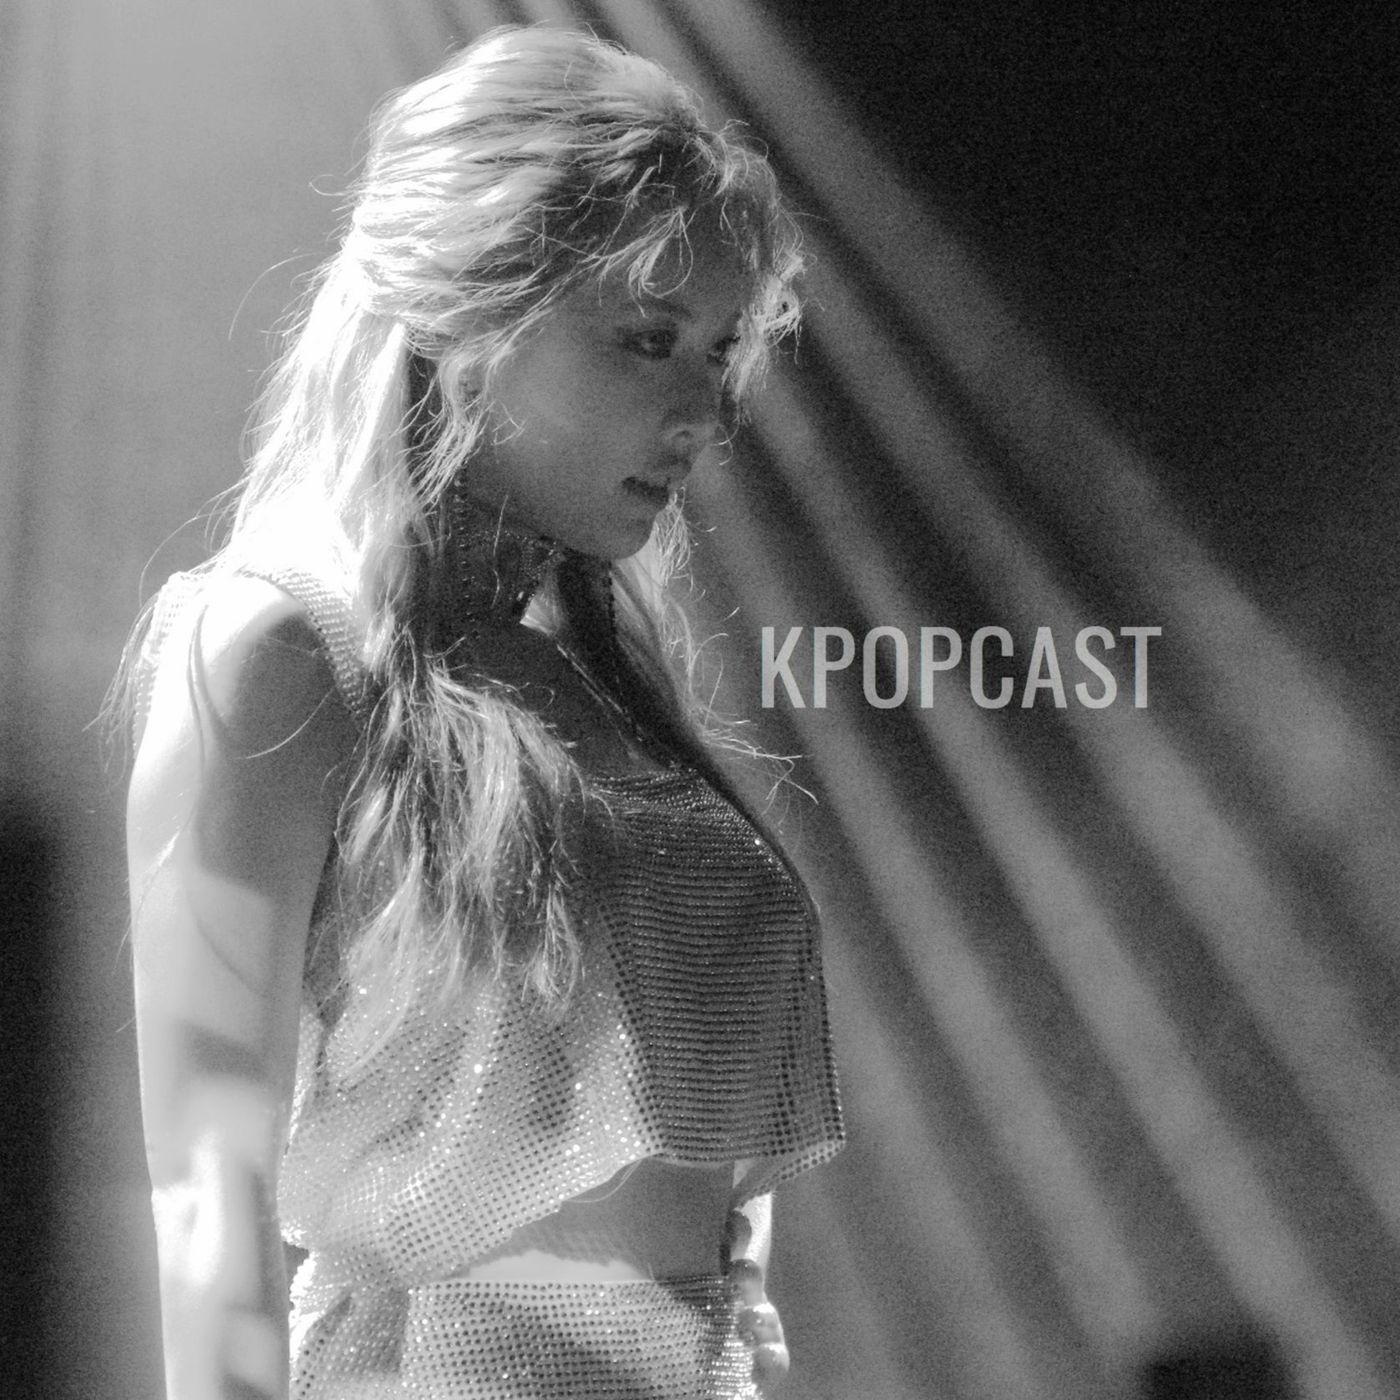 HyunA will remember this moment from San Francisco